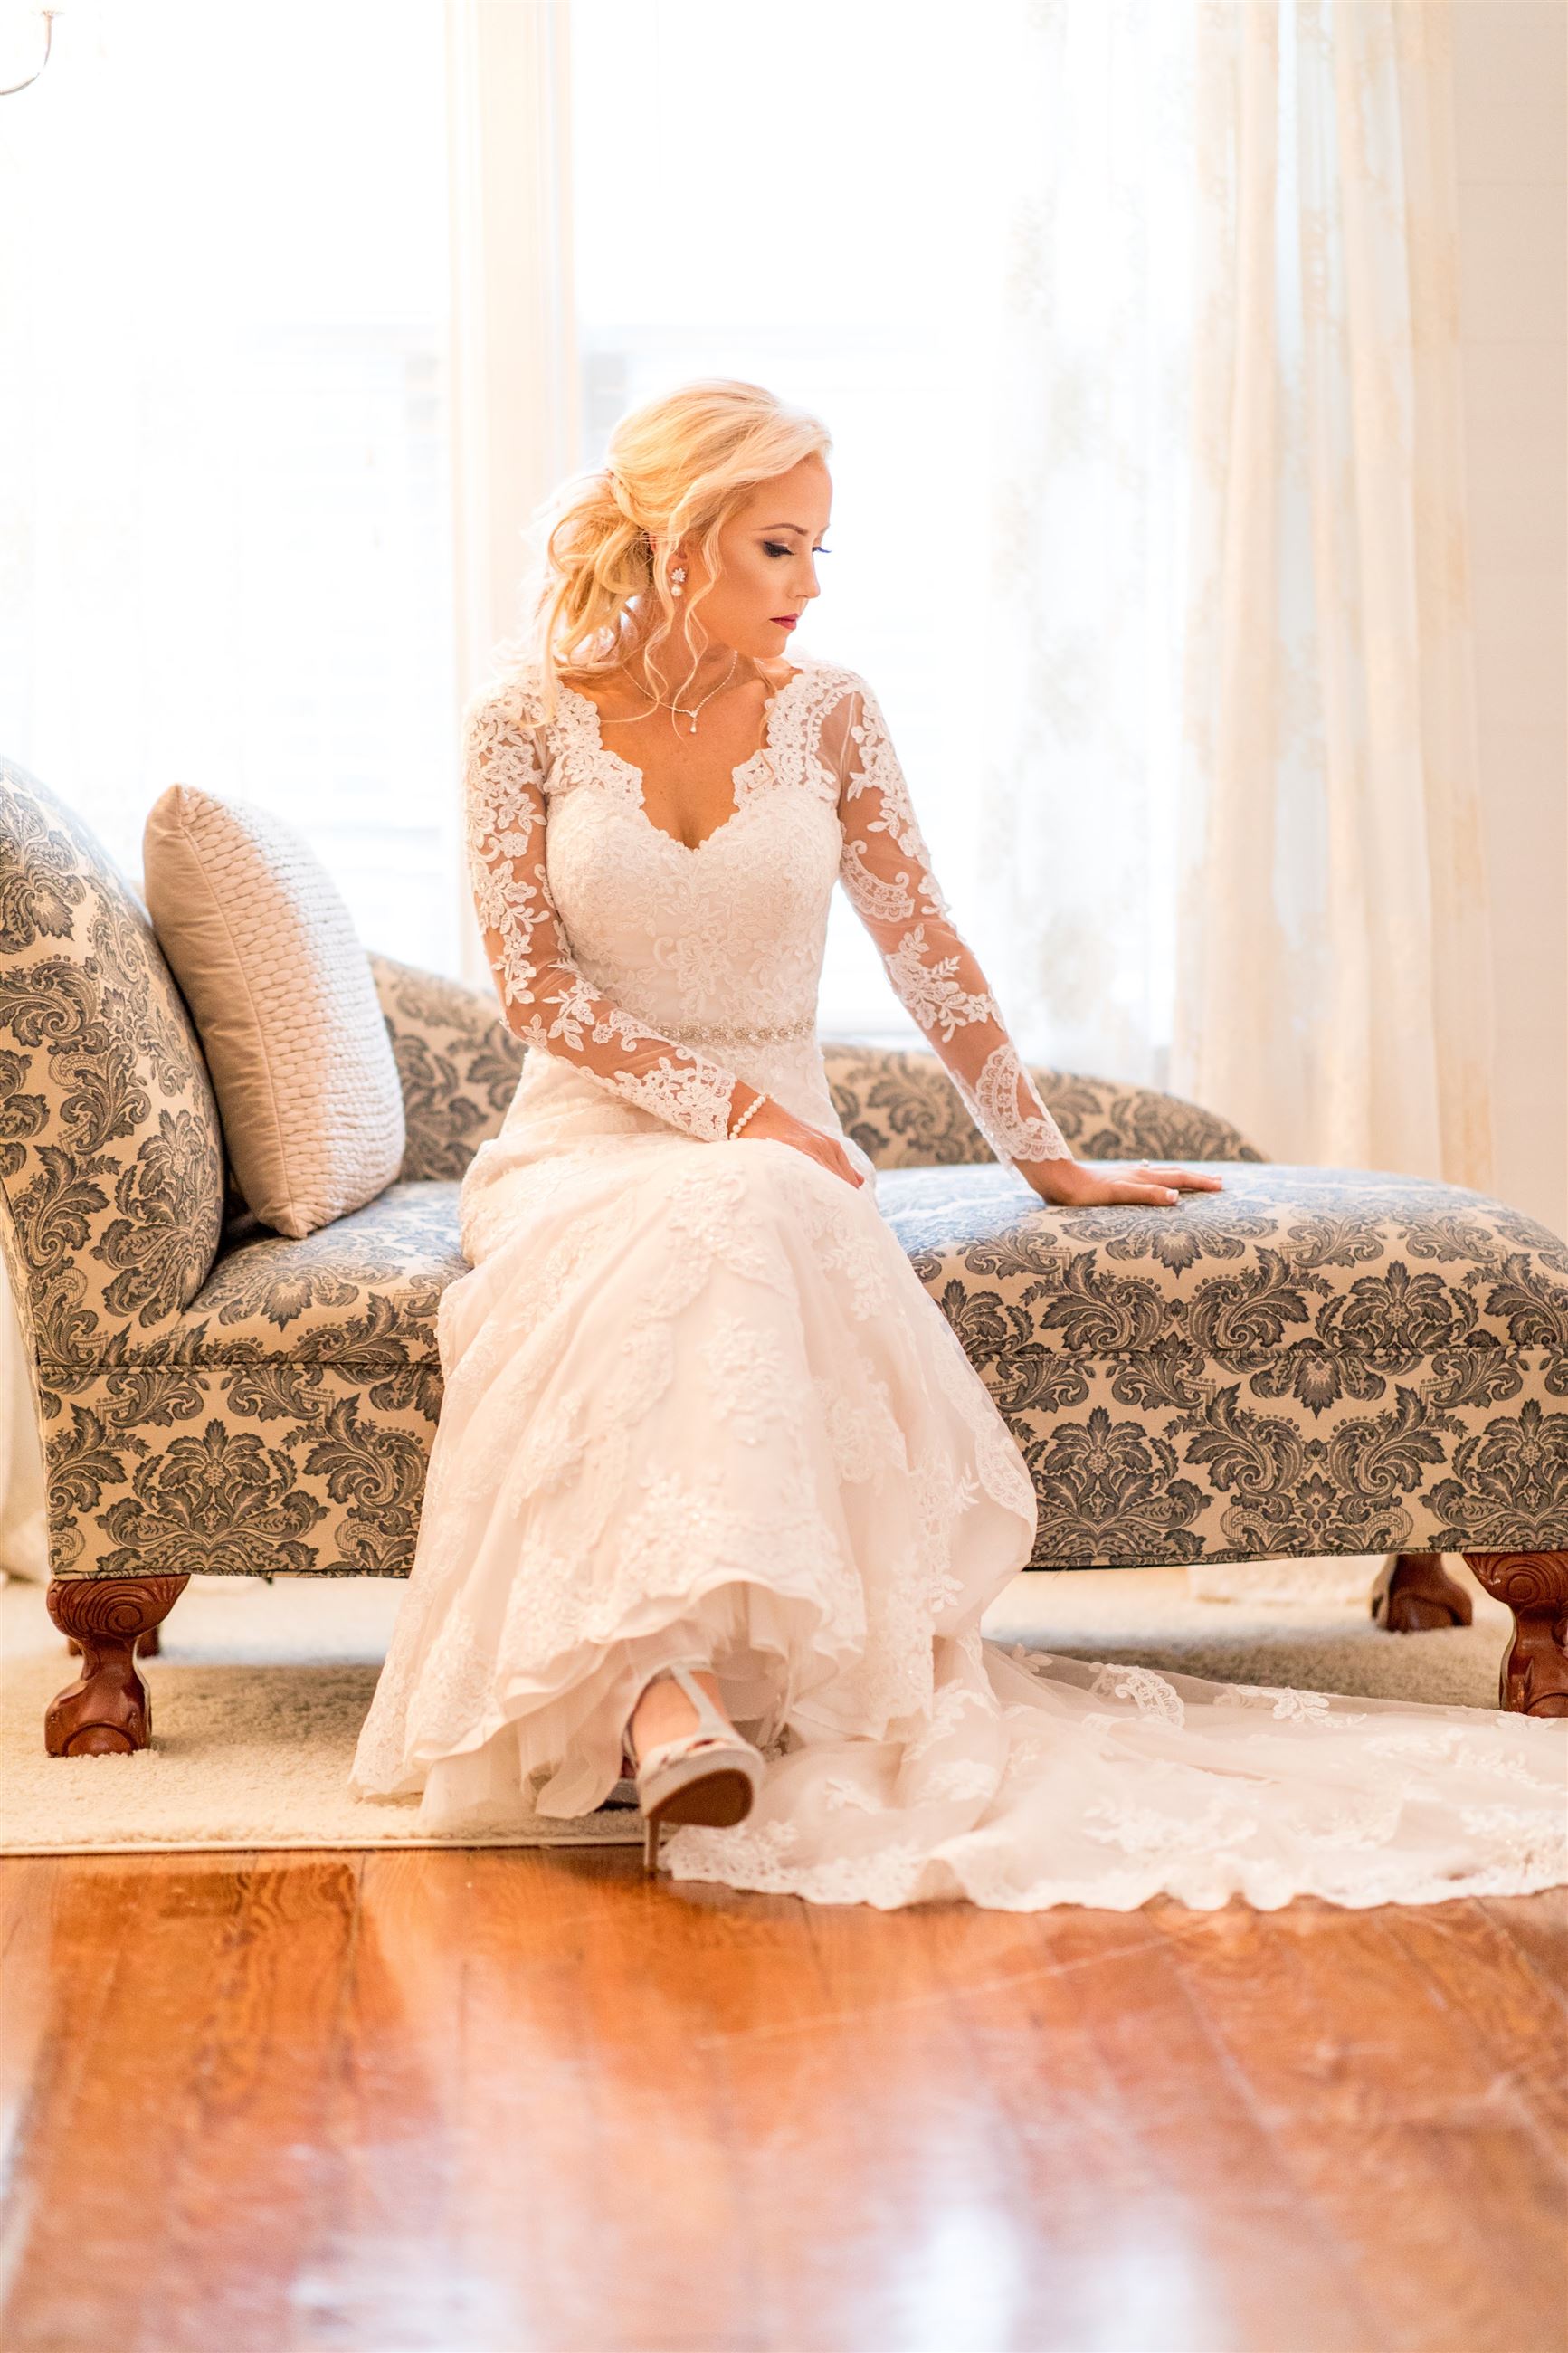 All About Alterations: Making Your Bridal Gown Perfect. Desktop Image